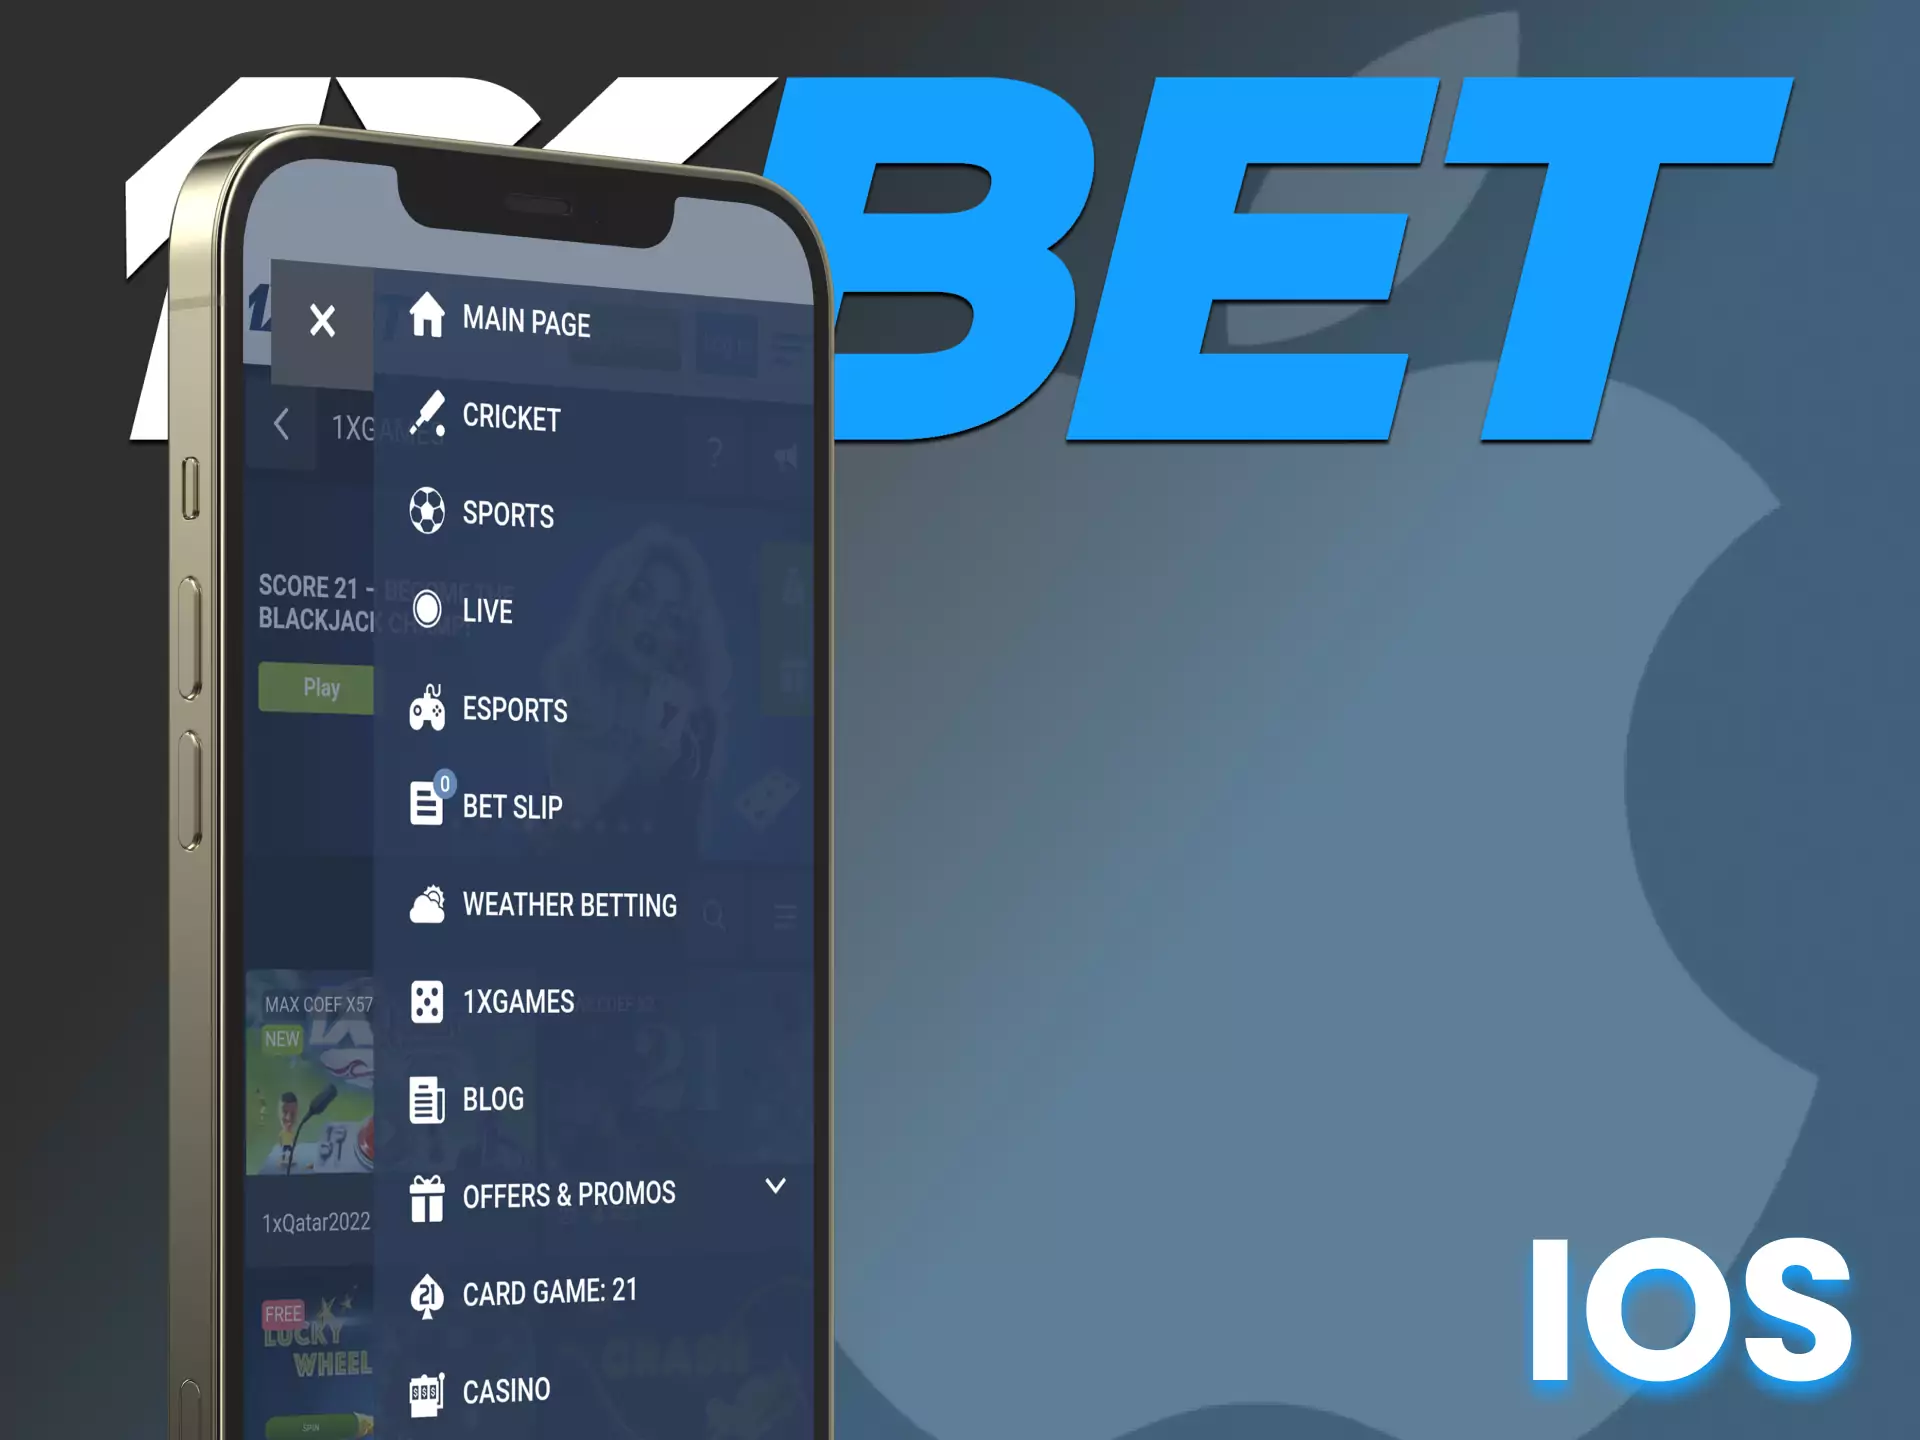 With 1XBET you can do it on your iOS phone using the special app.